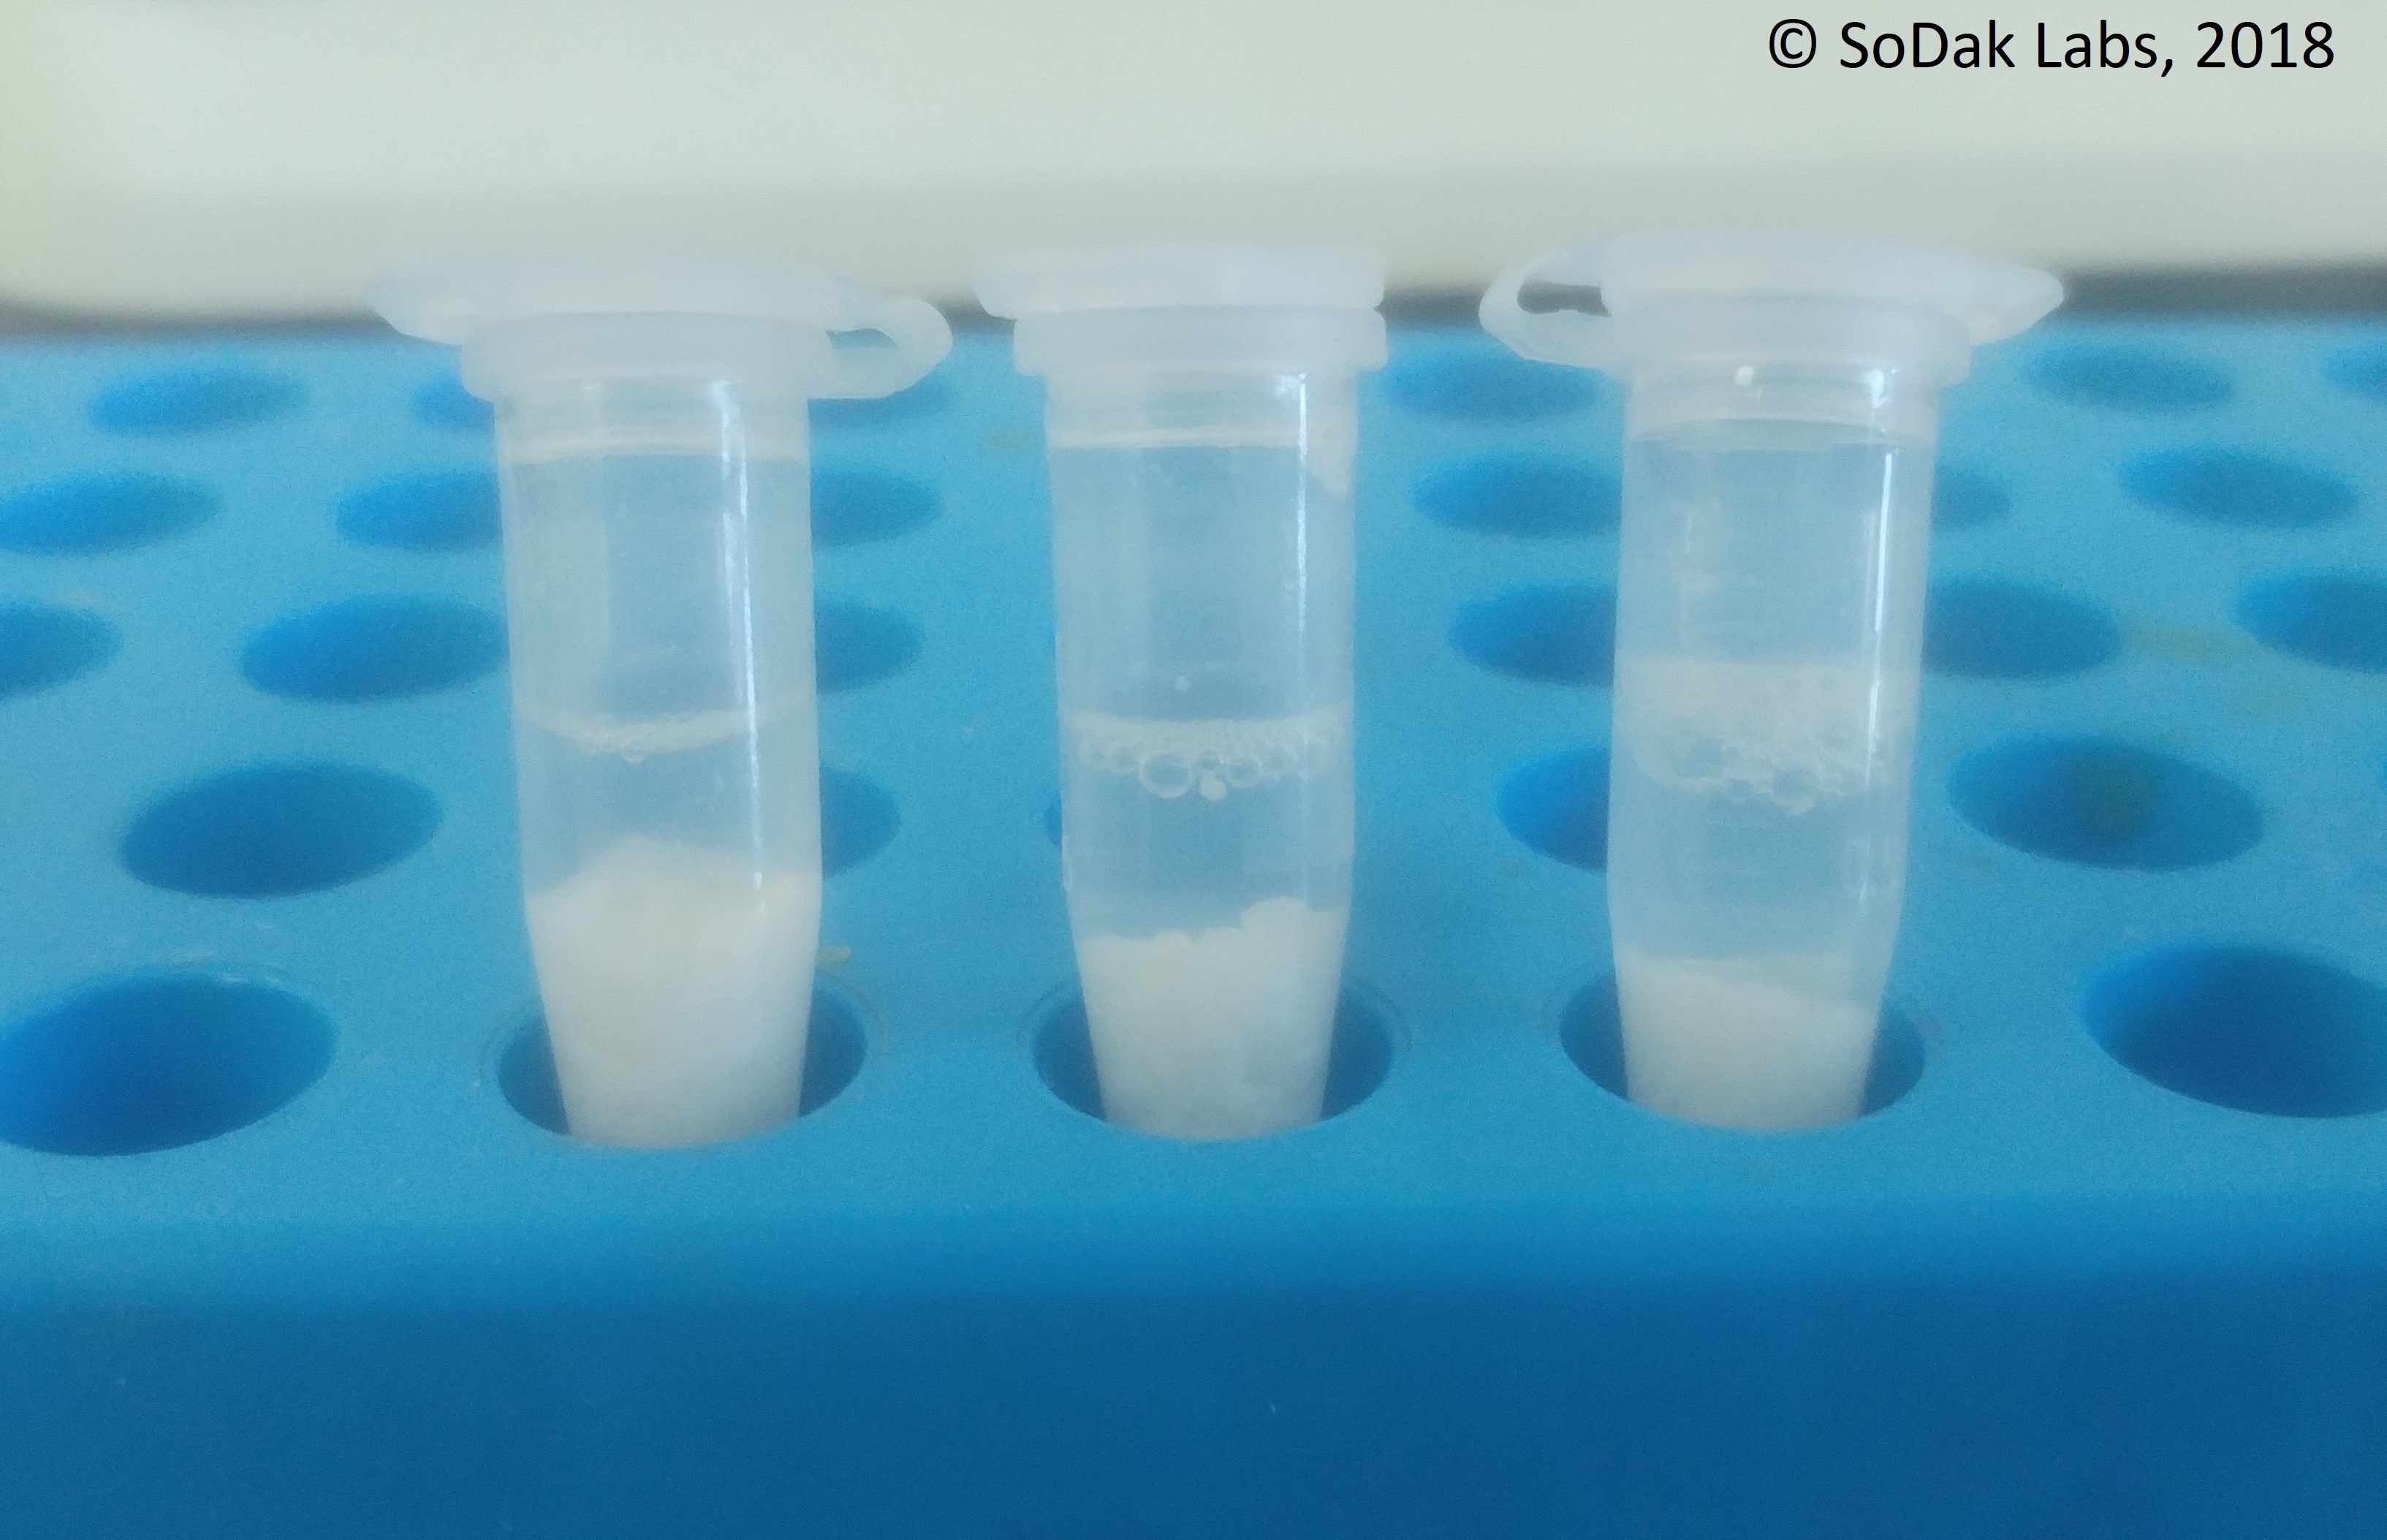 Rice in a lysis buffer during the extraction process